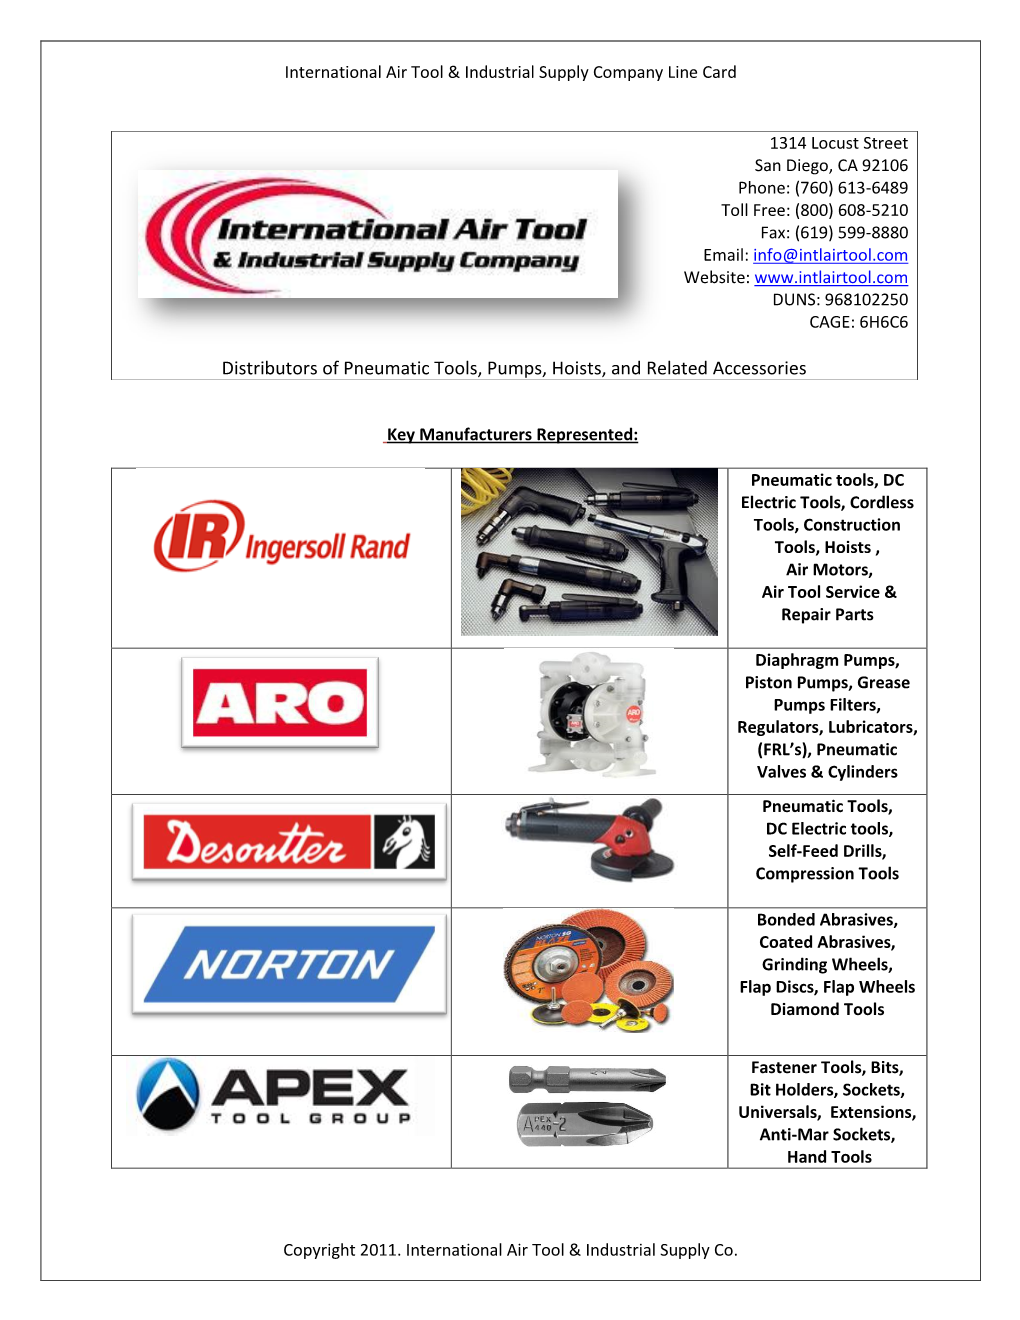 Distributors of Pneumatic Tools, Pumps, Hoists, and Related Accessories